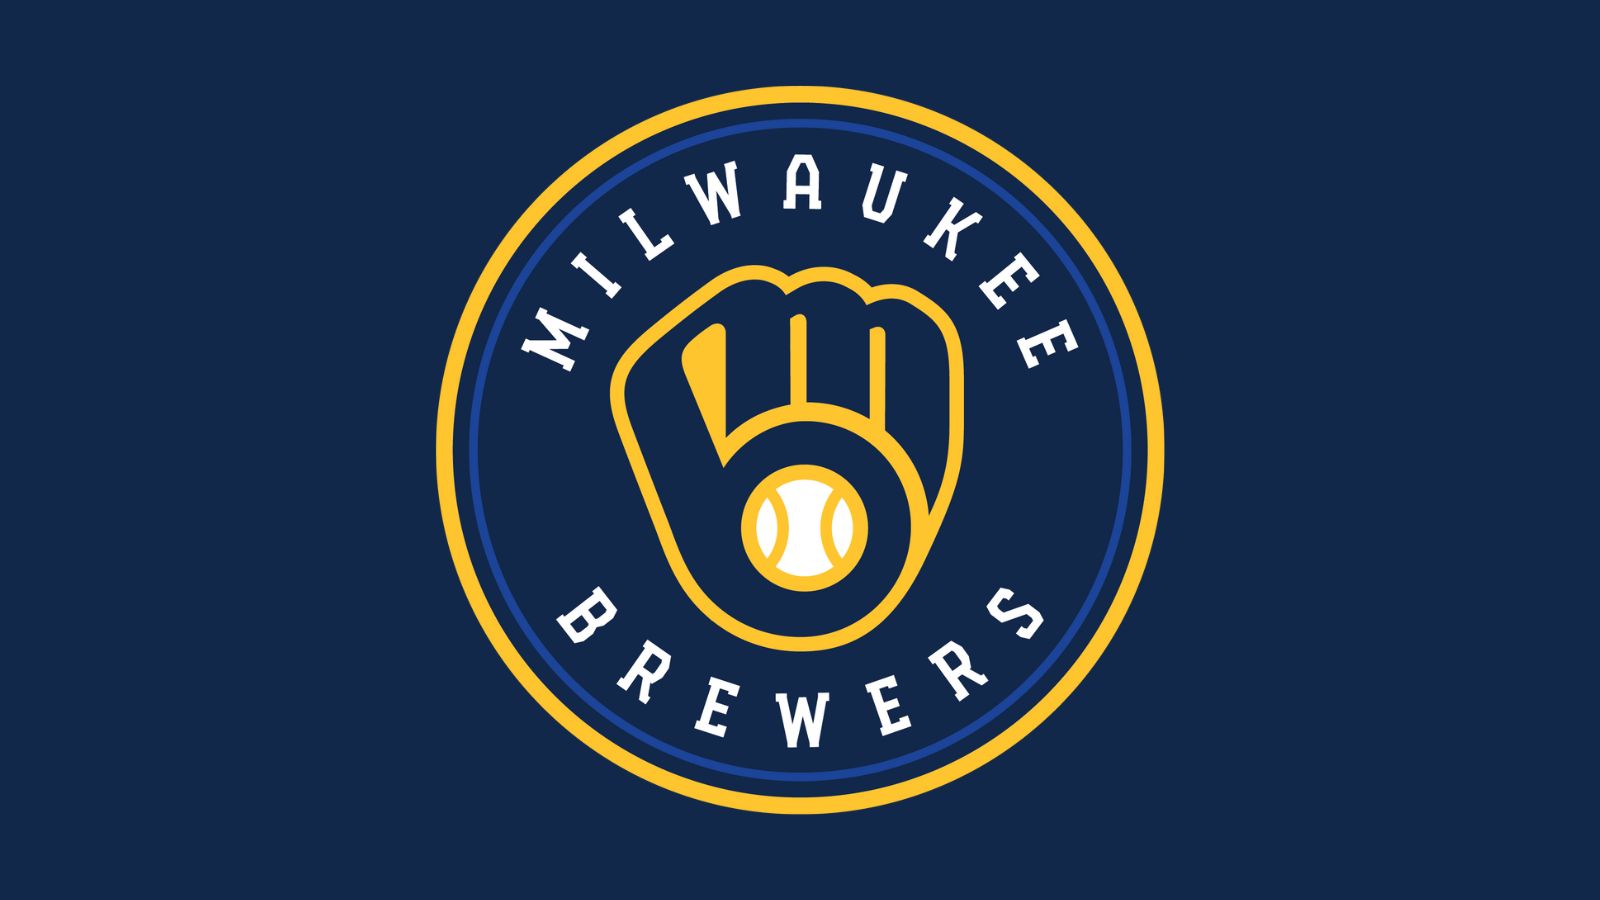 Brewers begin 2023 season with series win over Cubs